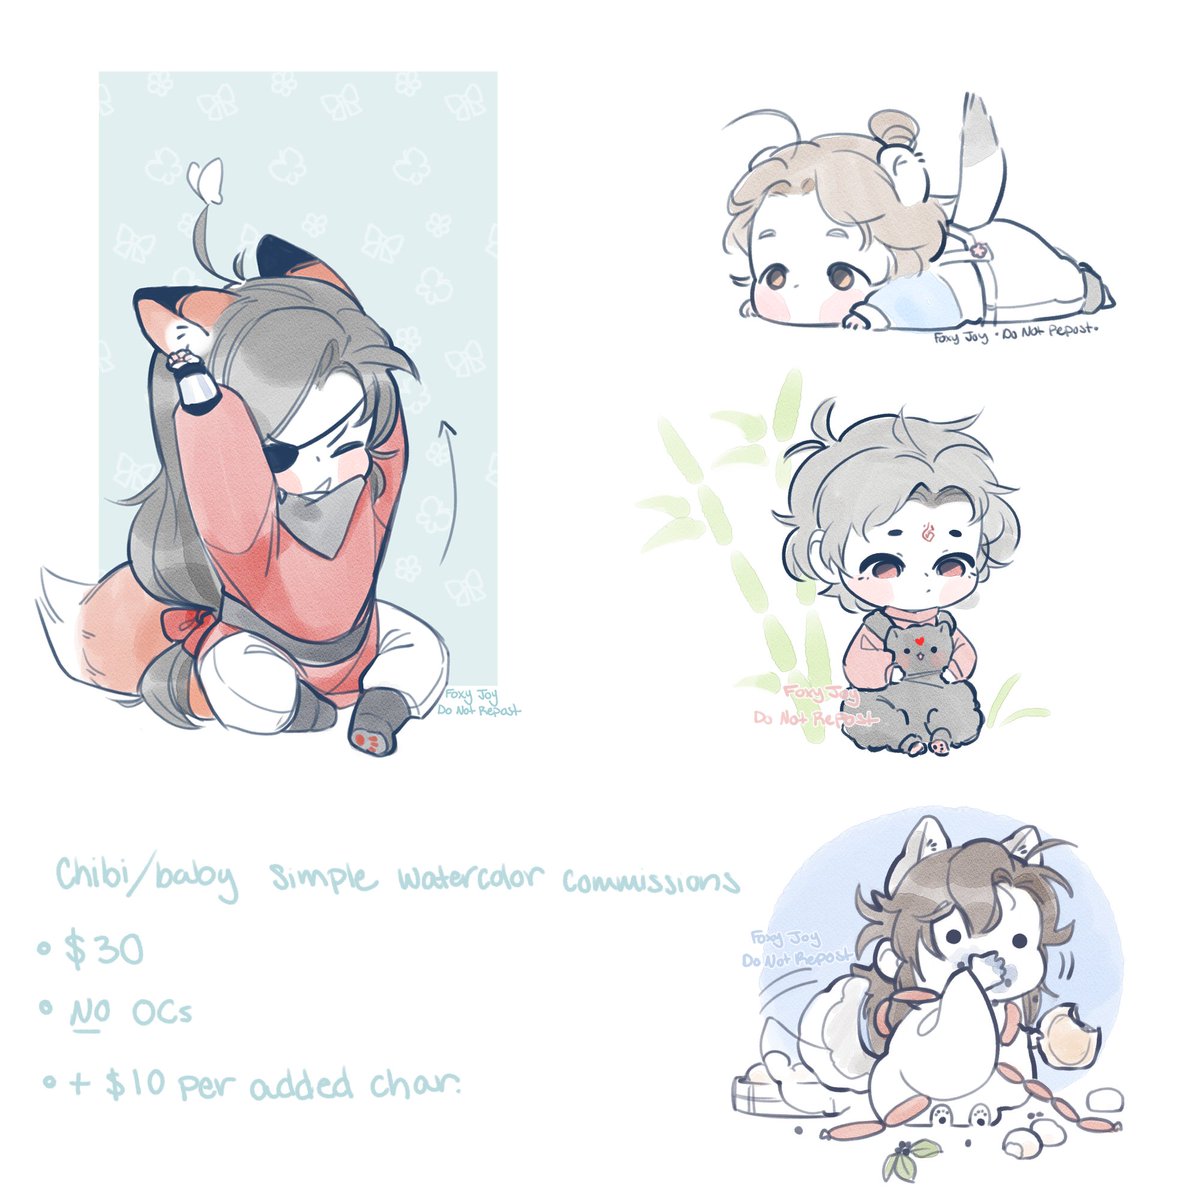 「Small Chibi/baby doodle commissions are 」|FoxyJoy 🦊🌸のイラスト